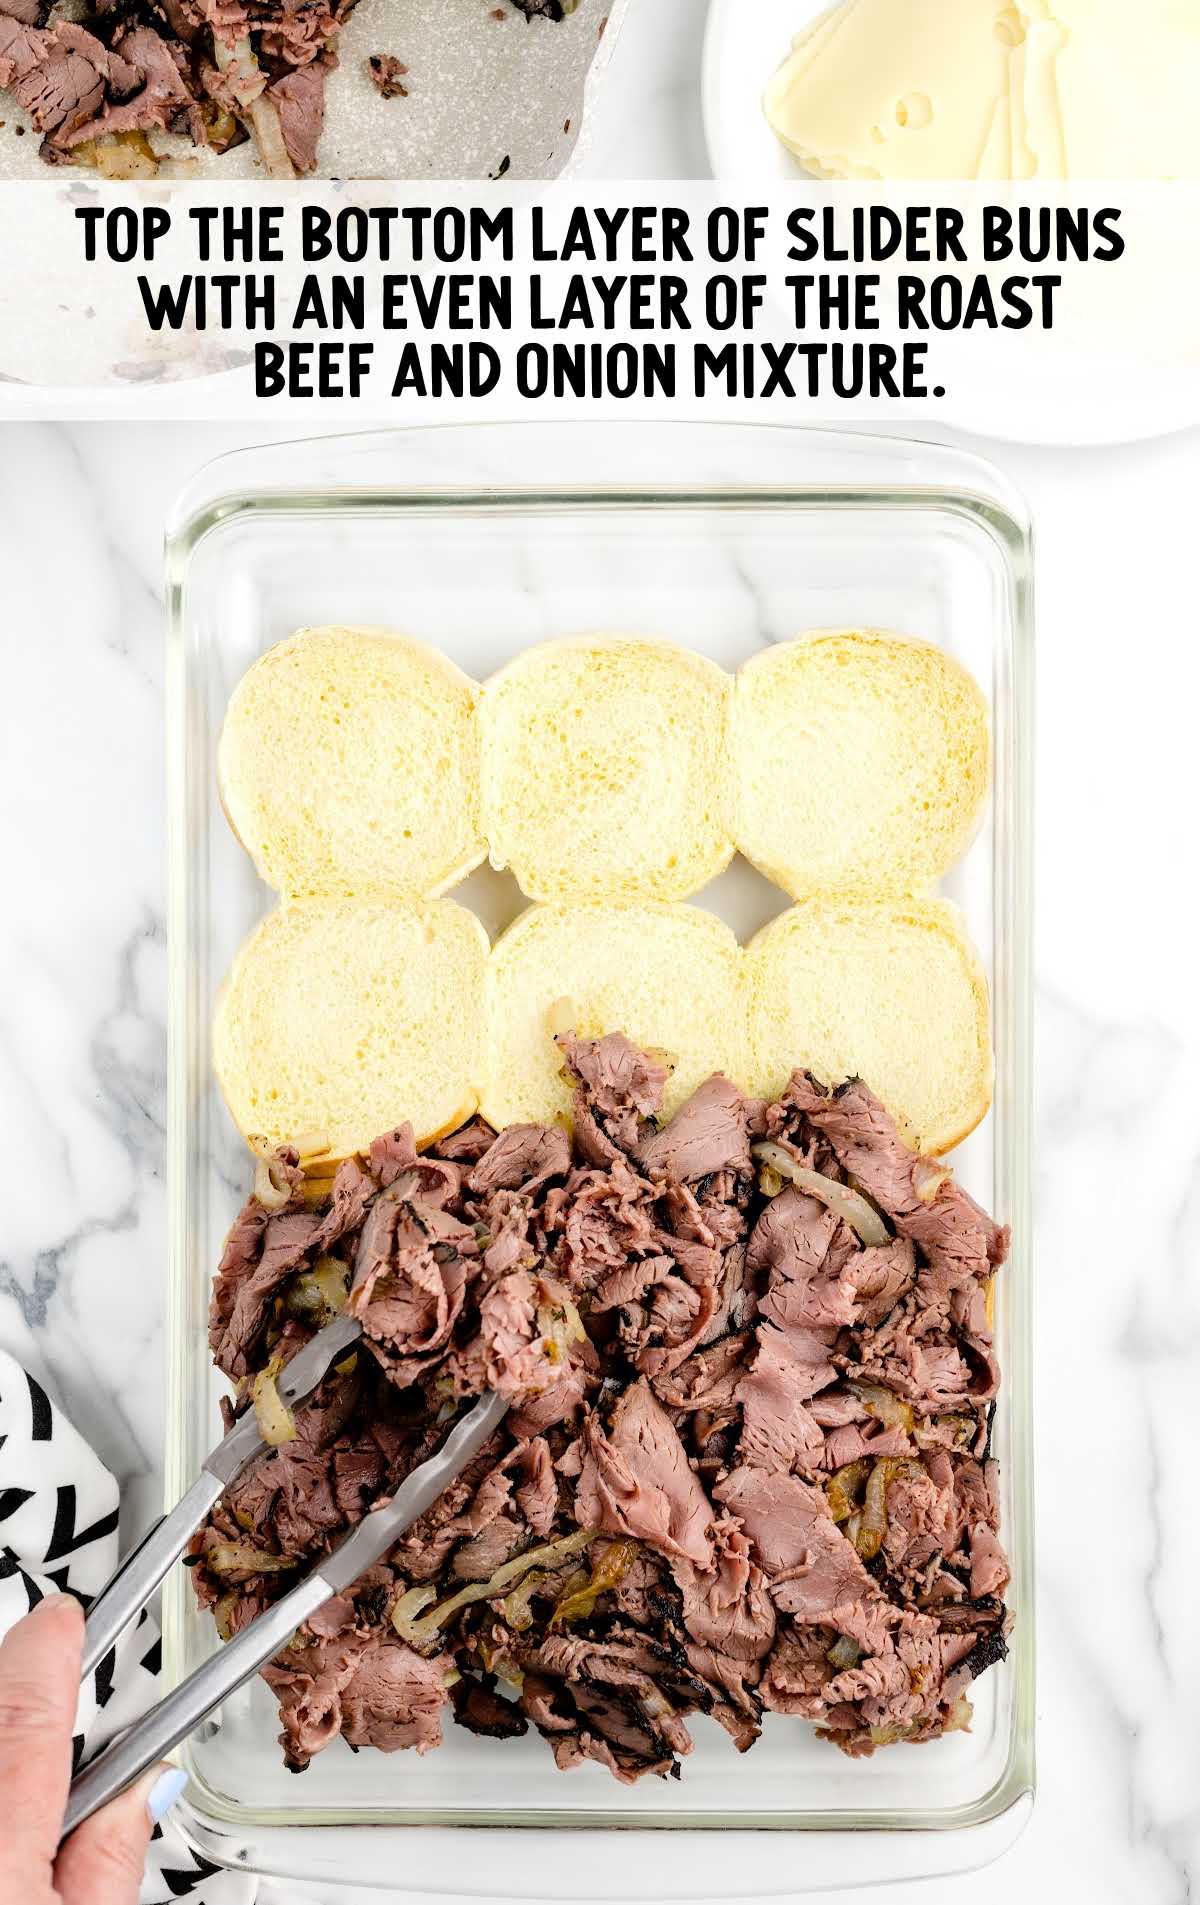 bottom layer of slider buns topped with an even layer of roast beef and onion mixture